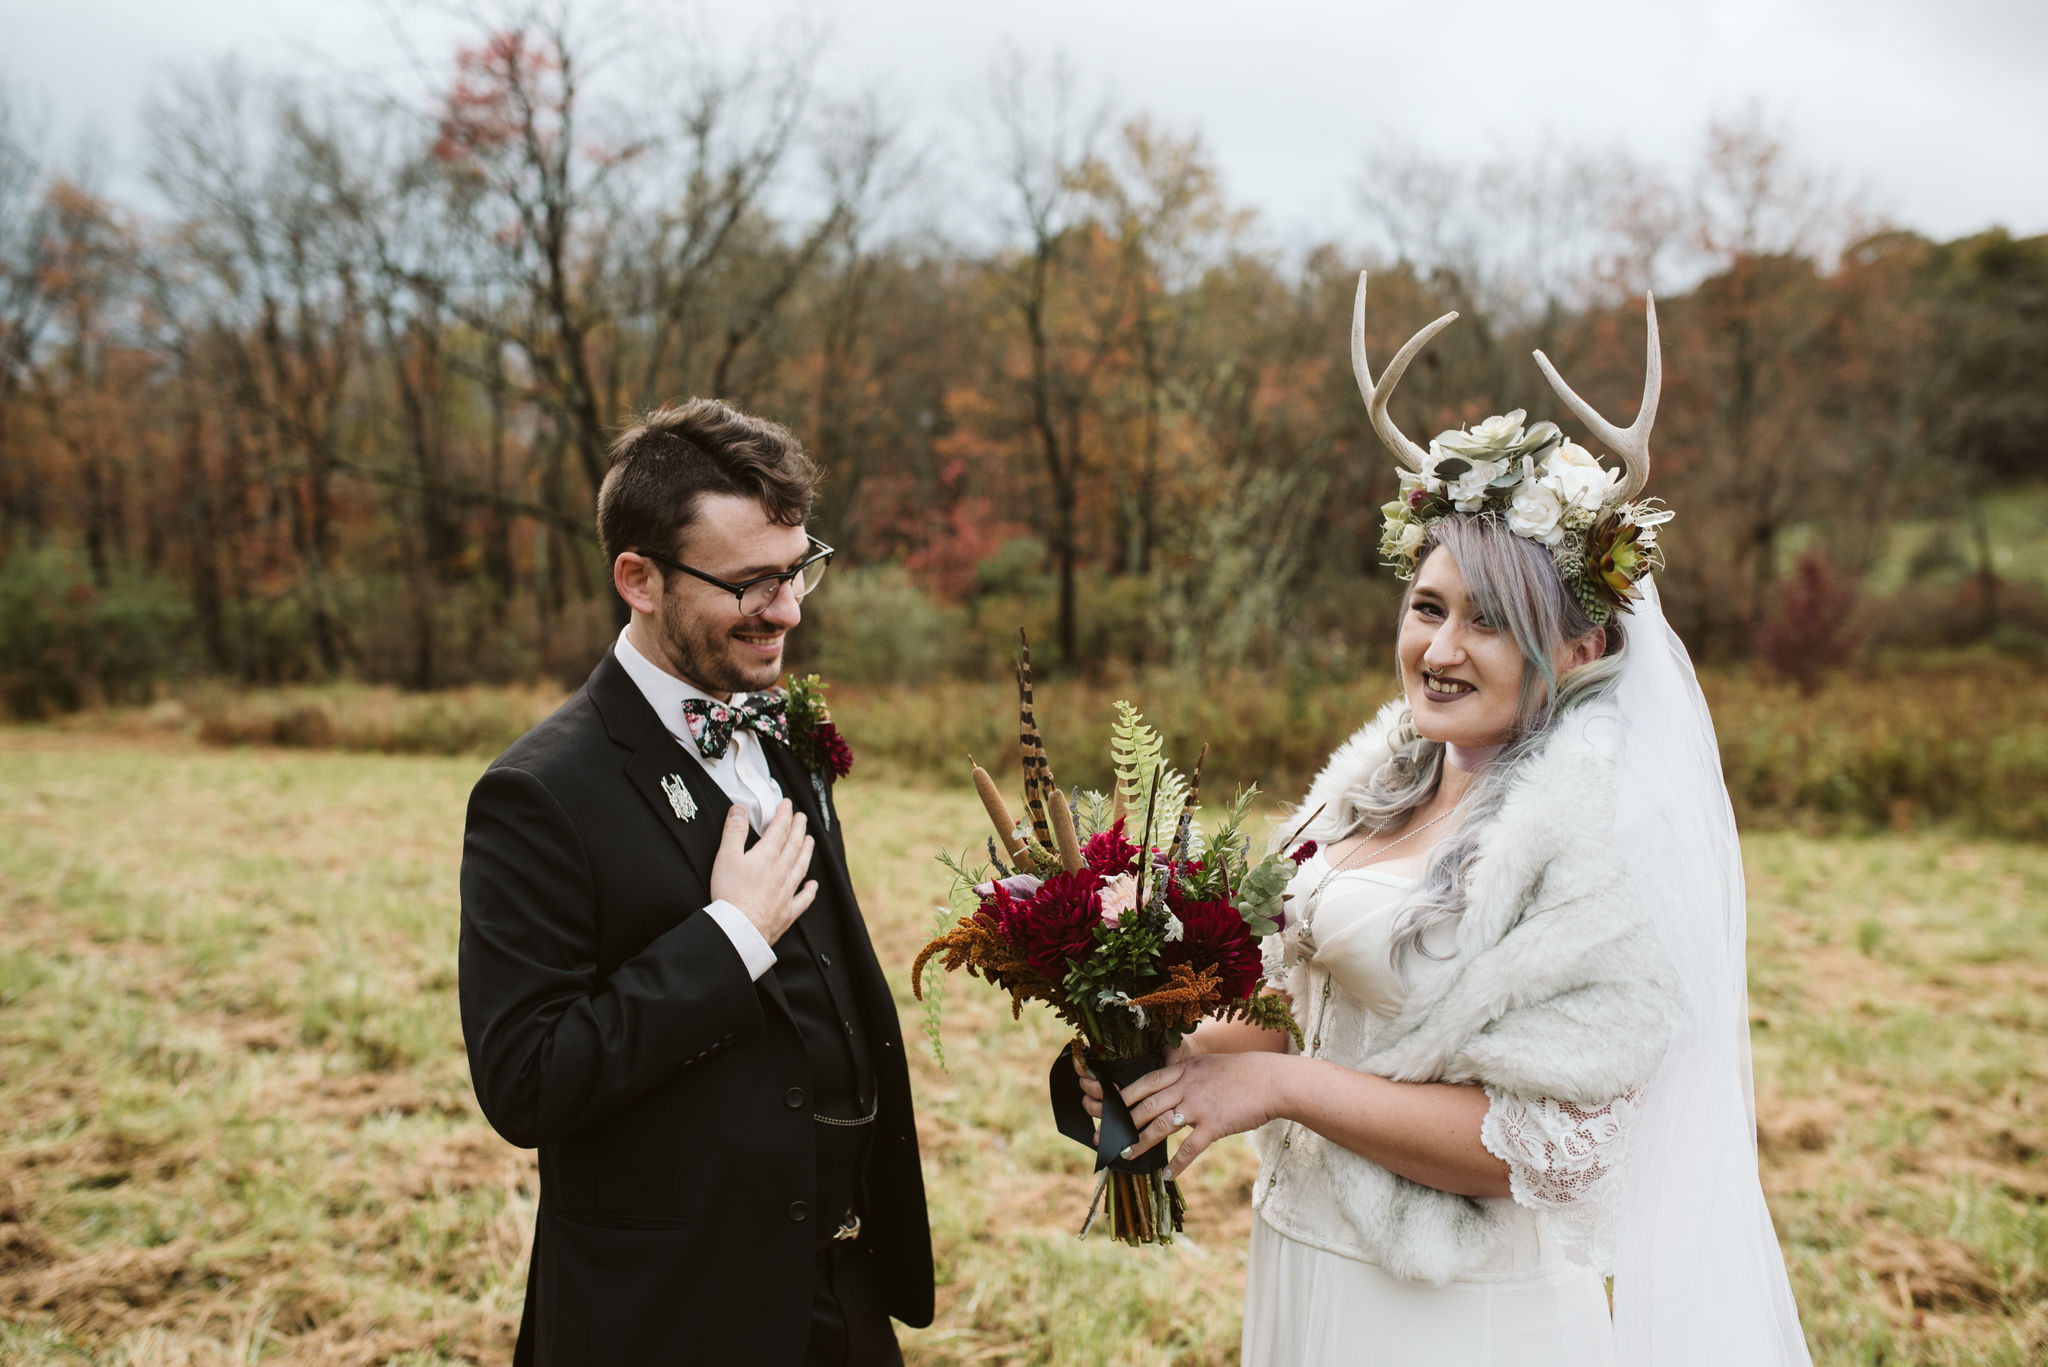  Maryland, Baltimore Wedding Photographer, Backyard Wedding, Fall, October, Dark Bohemian, Whimsical, Fun, Portrait of Bride and Groom Outside, The Modest Florist, Flower Crown with Antlers 